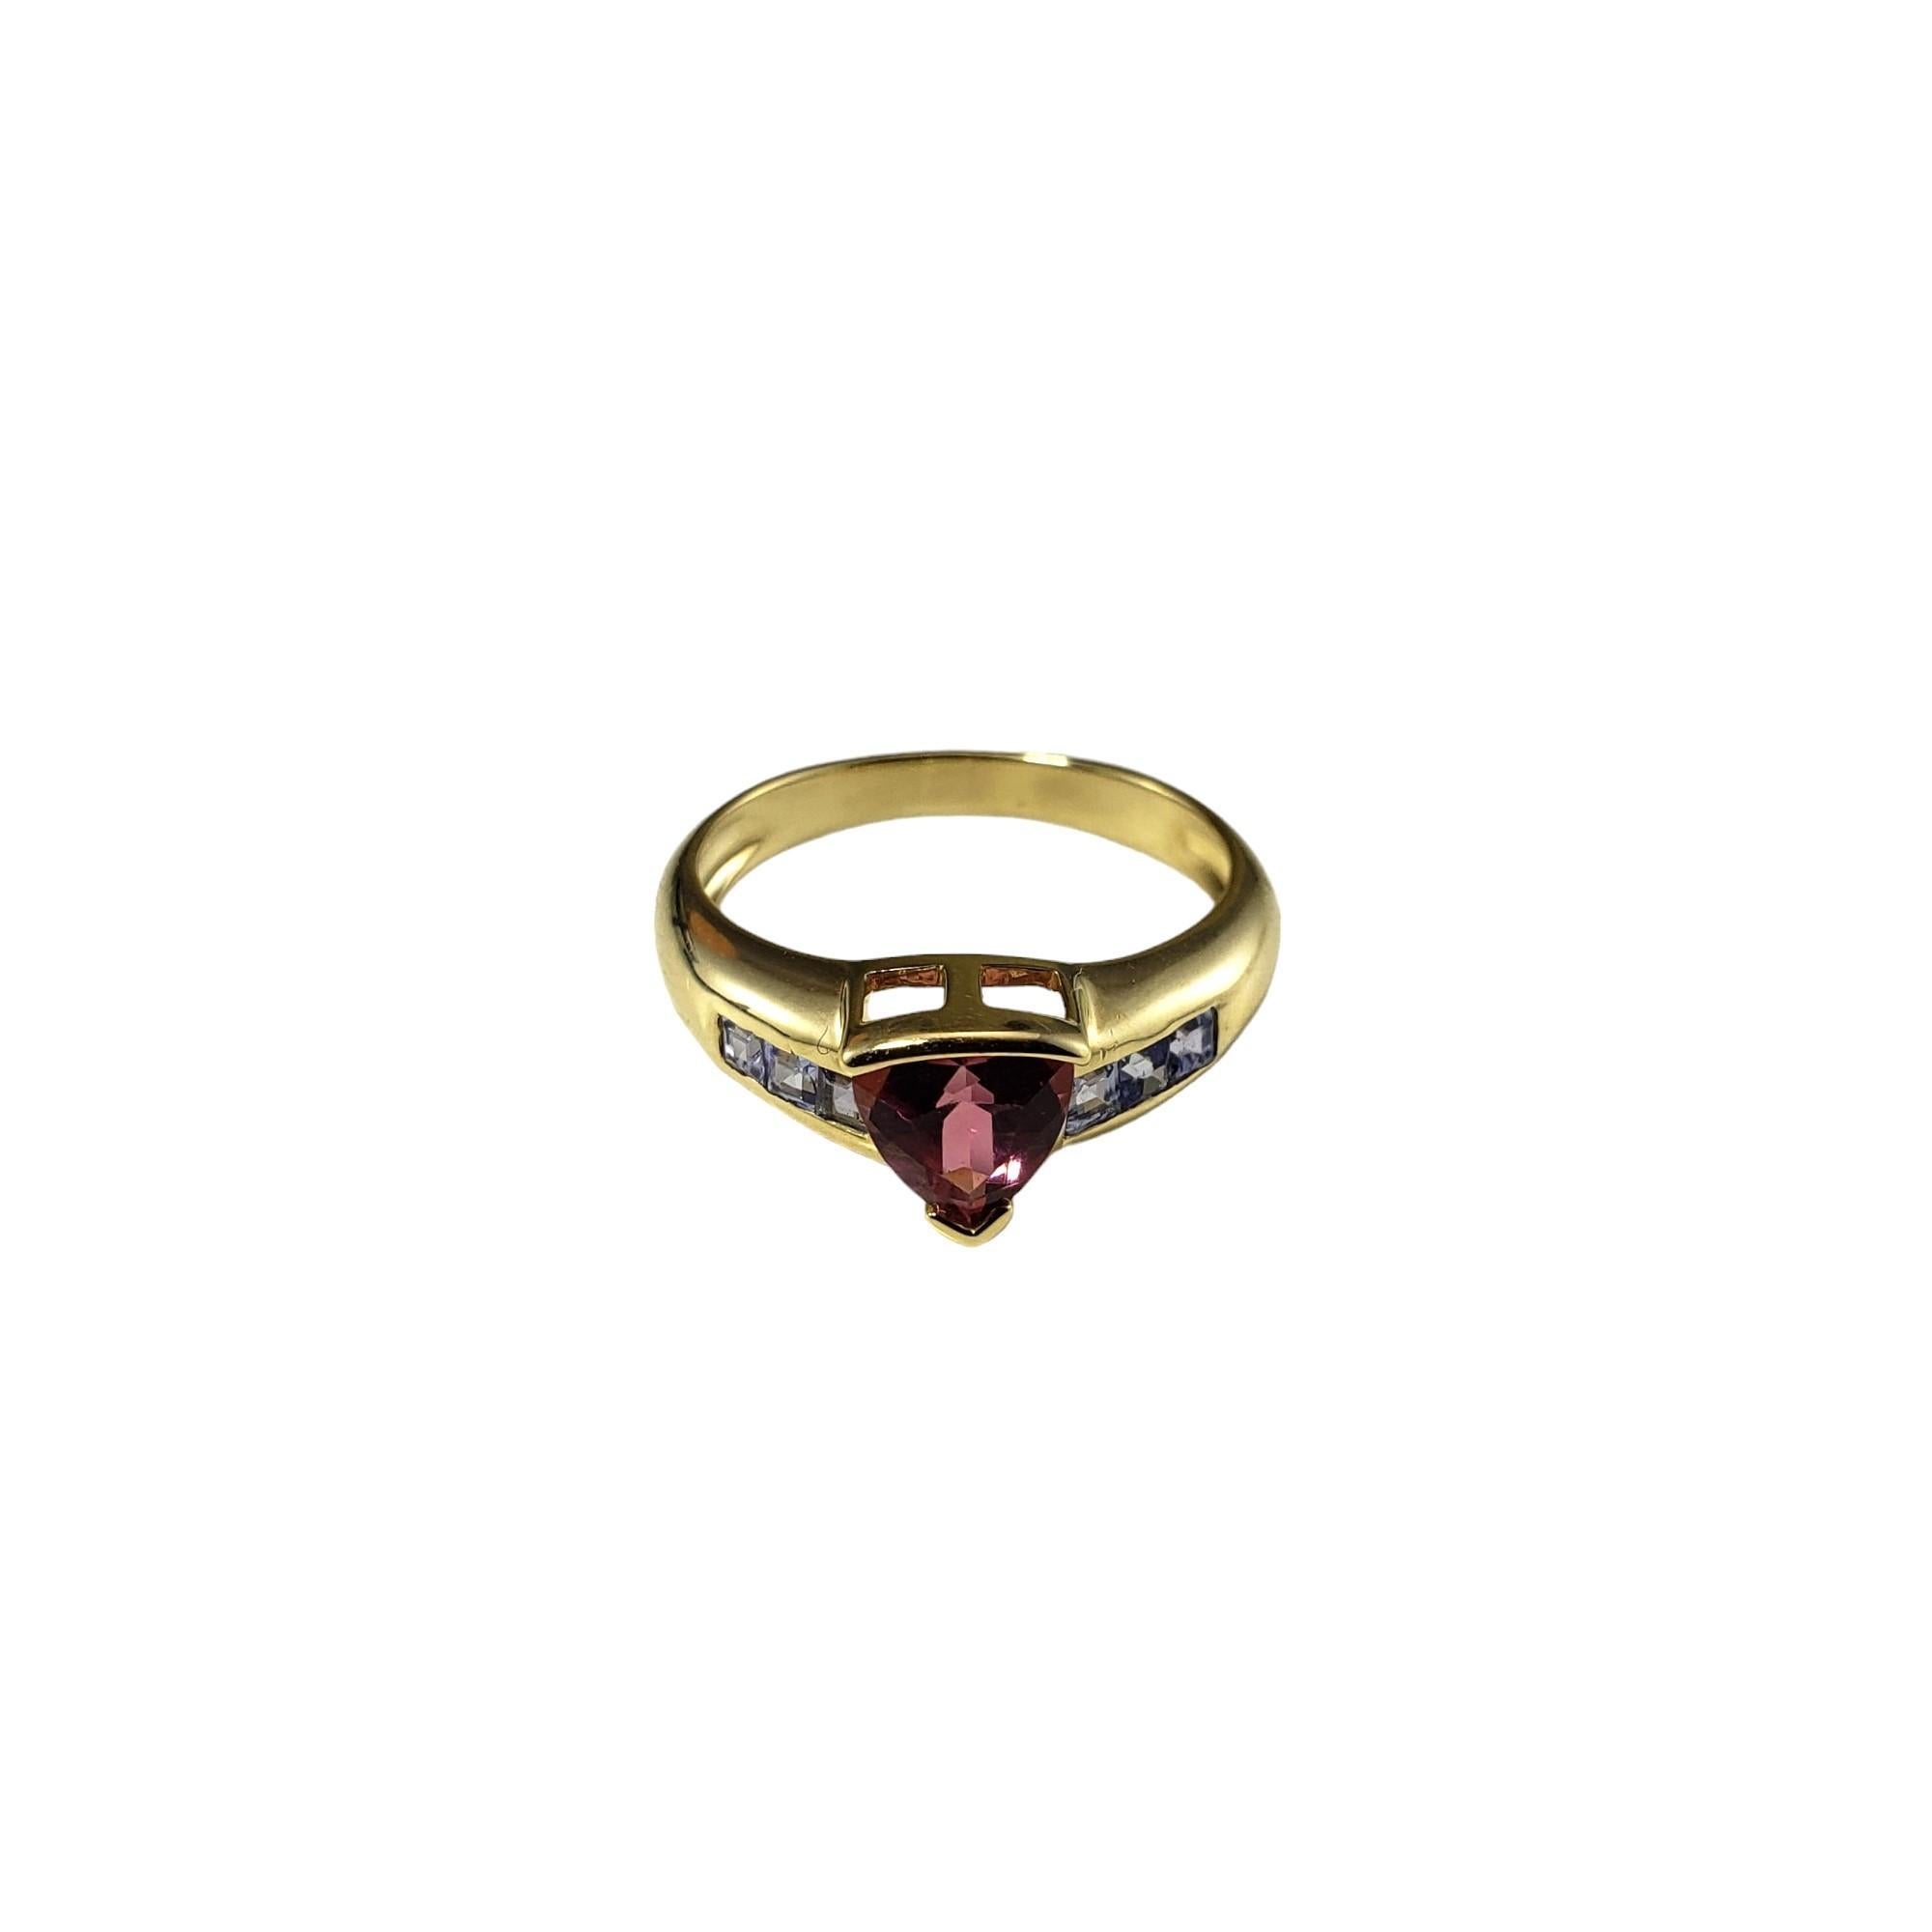 Vintage 14K Yellow Gold Pink Tourmaline and Tanzanite Ring Size 7-

This stunning ring features one triangle cut pink tourmaline (7 mm x 7 mm) and six square cut tanzanites set in classic 14K yellow gold.

Ring Size: 7

Stamped: 14K

Weight: 3.4